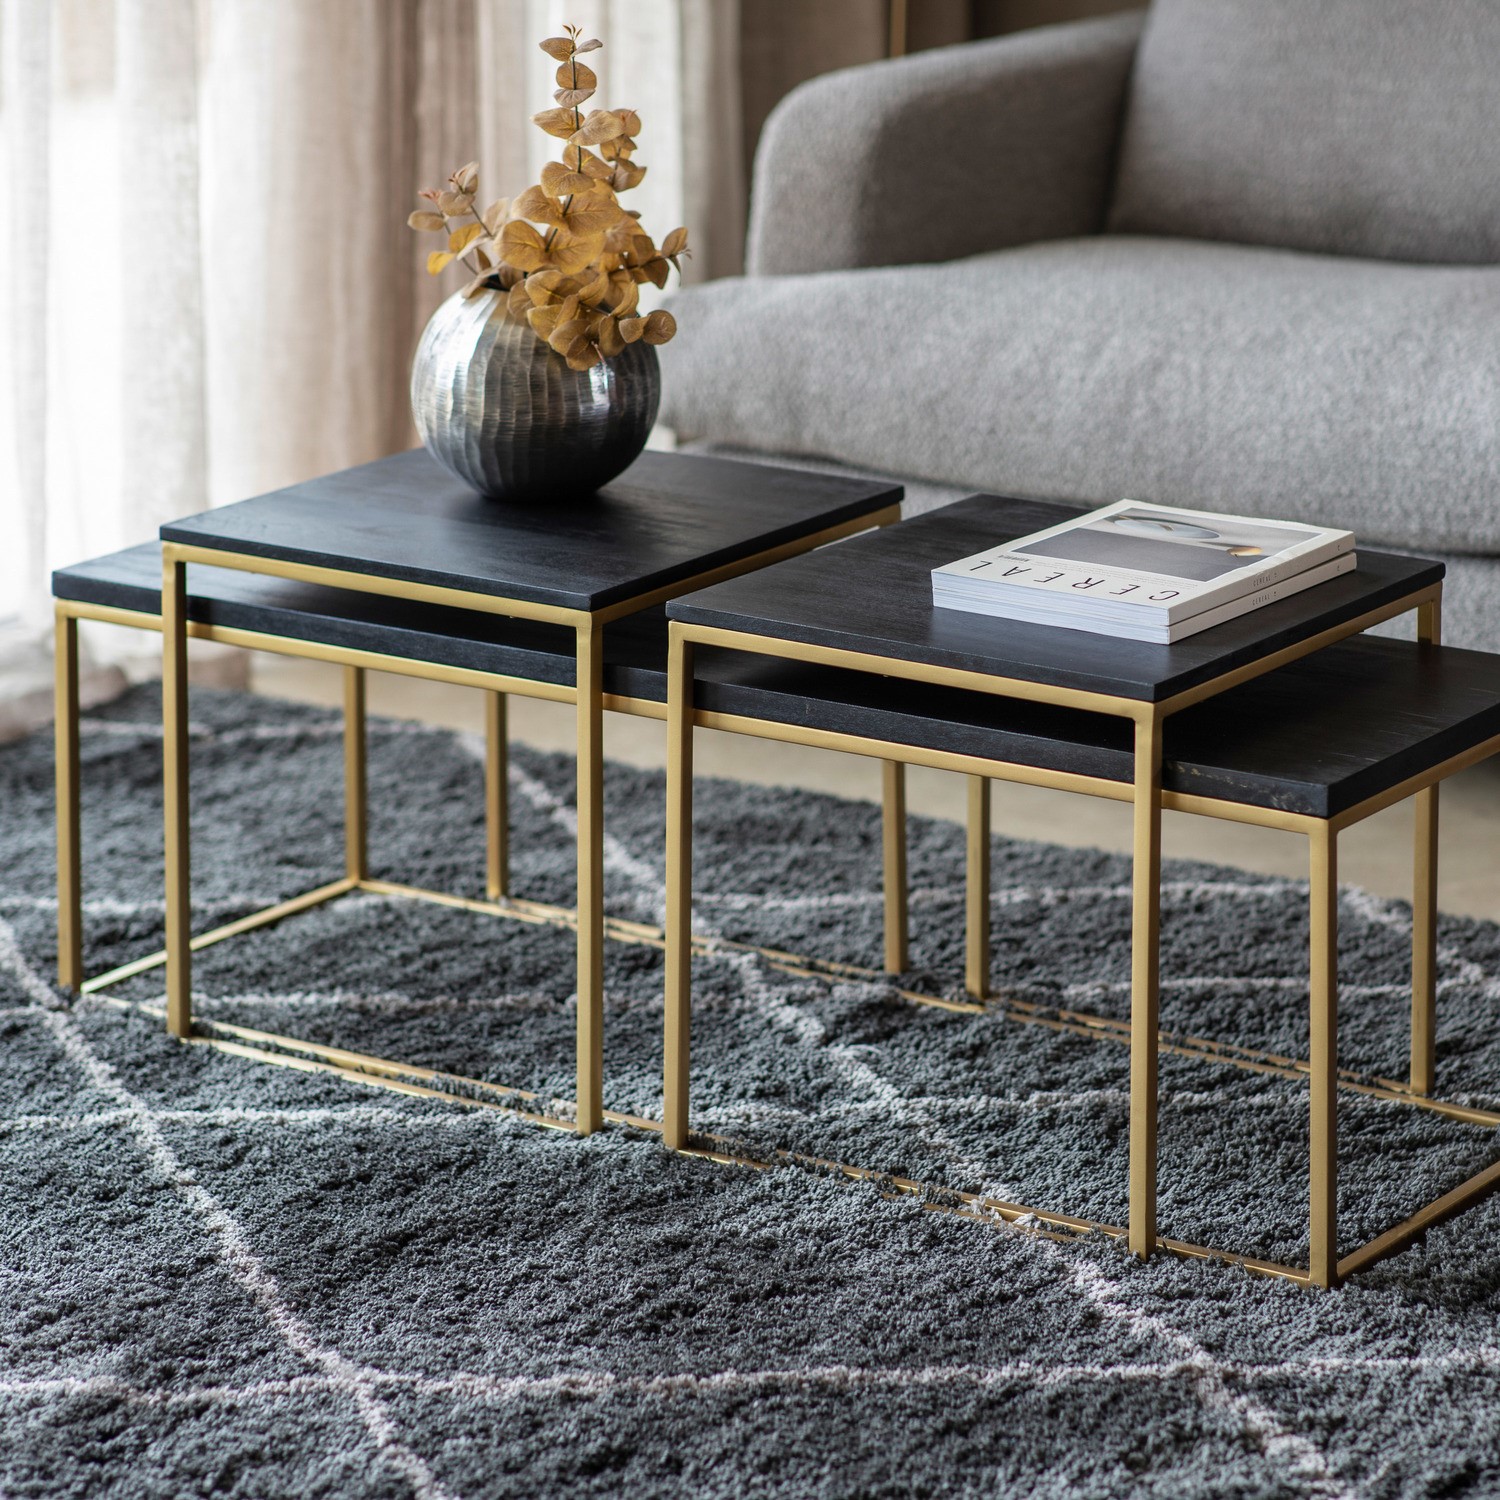 Photo of Nest of 3 coffee tables in black and gold - bertie - caspian house